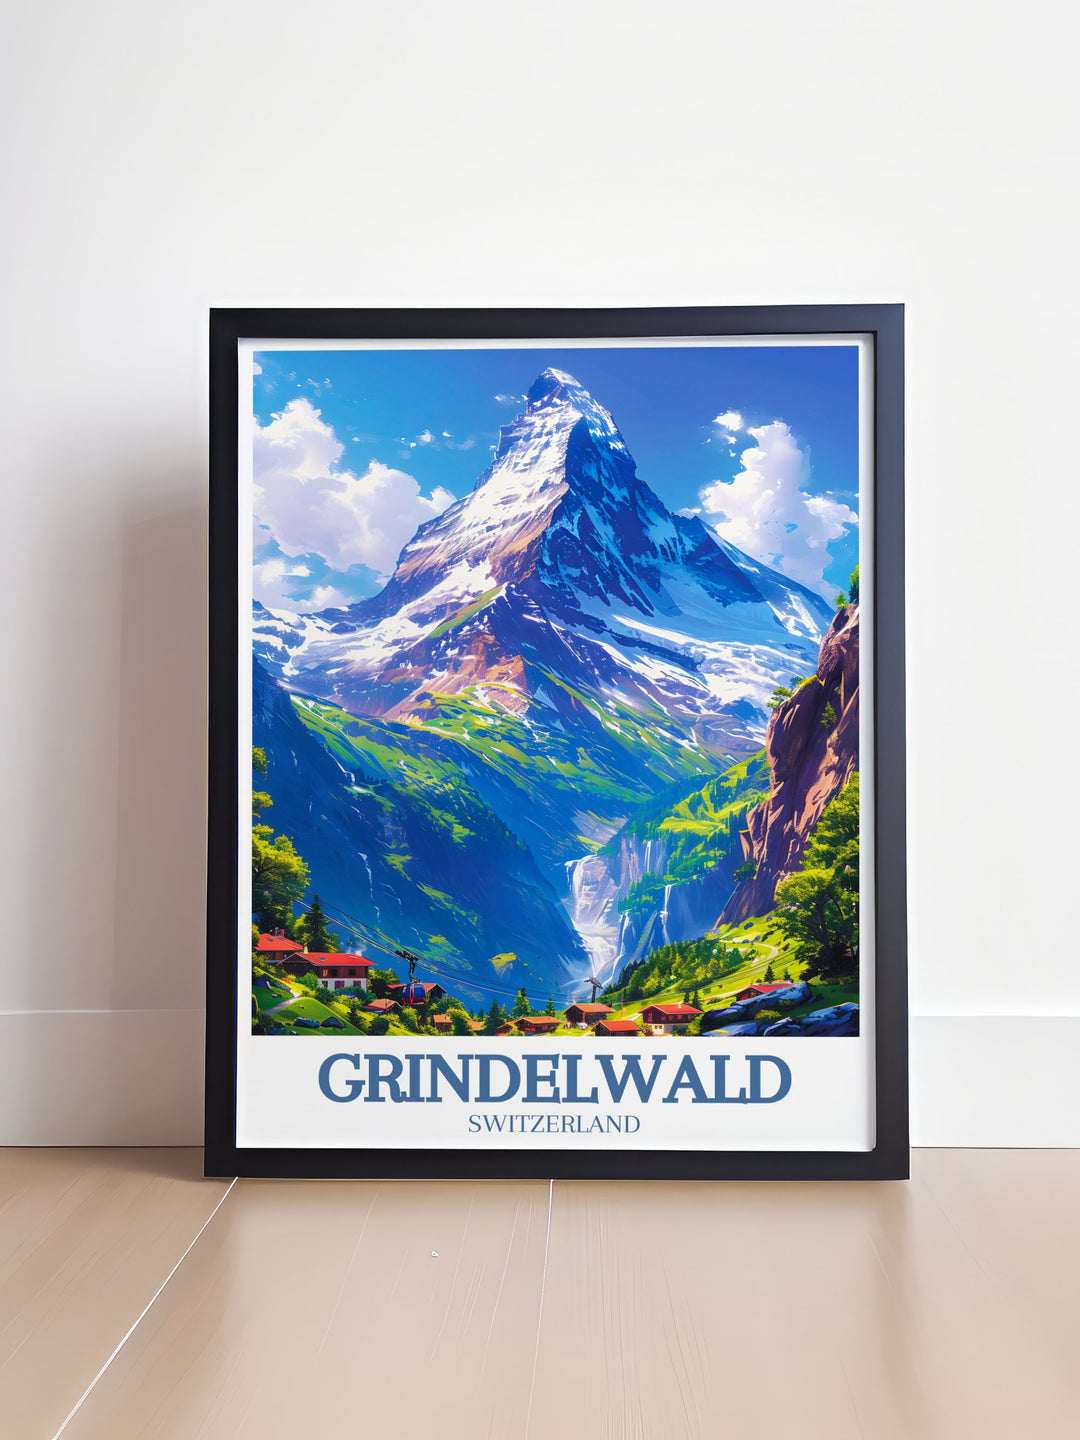 A detailed art print of Eiger mountain Grindelwald First capturing the essence of the Swiss Alps. This Grindelwald First artwork showcases the natural beauty and tranquility of the mountain village making it a perfect gift.